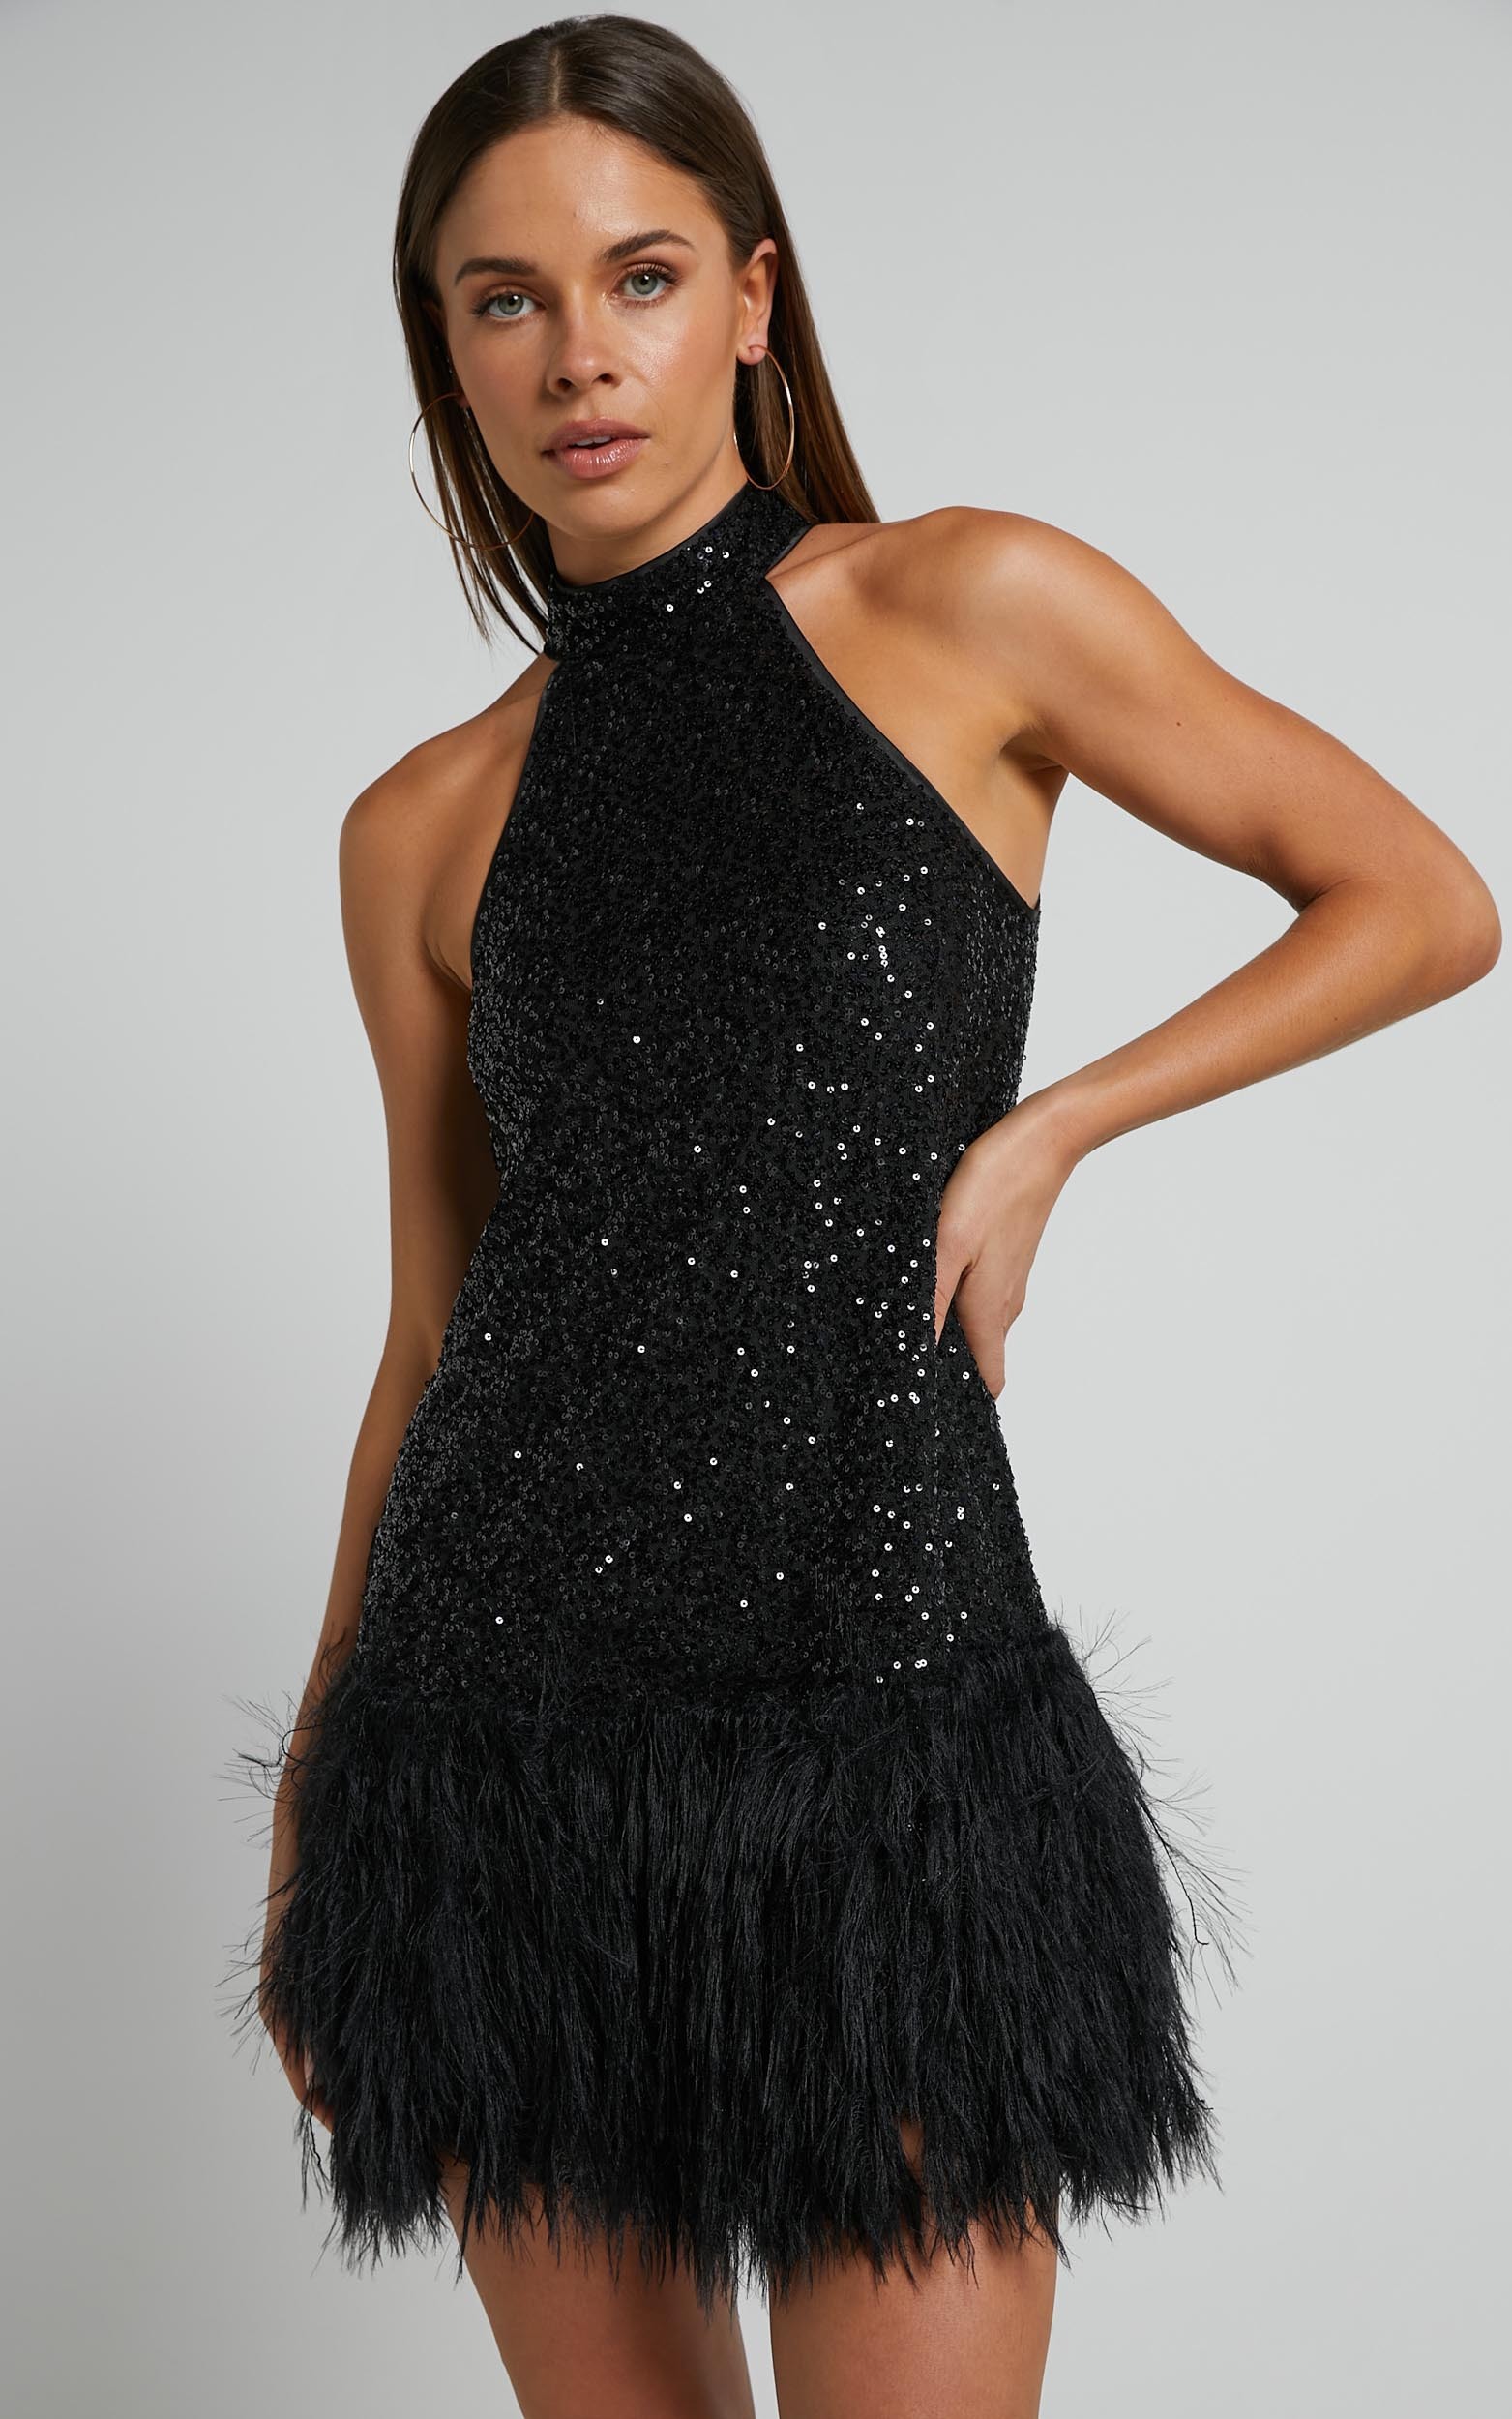 Malisha High Neck Faux Feather Mini Dress in Black - 06, BLK1, hi-res image number null